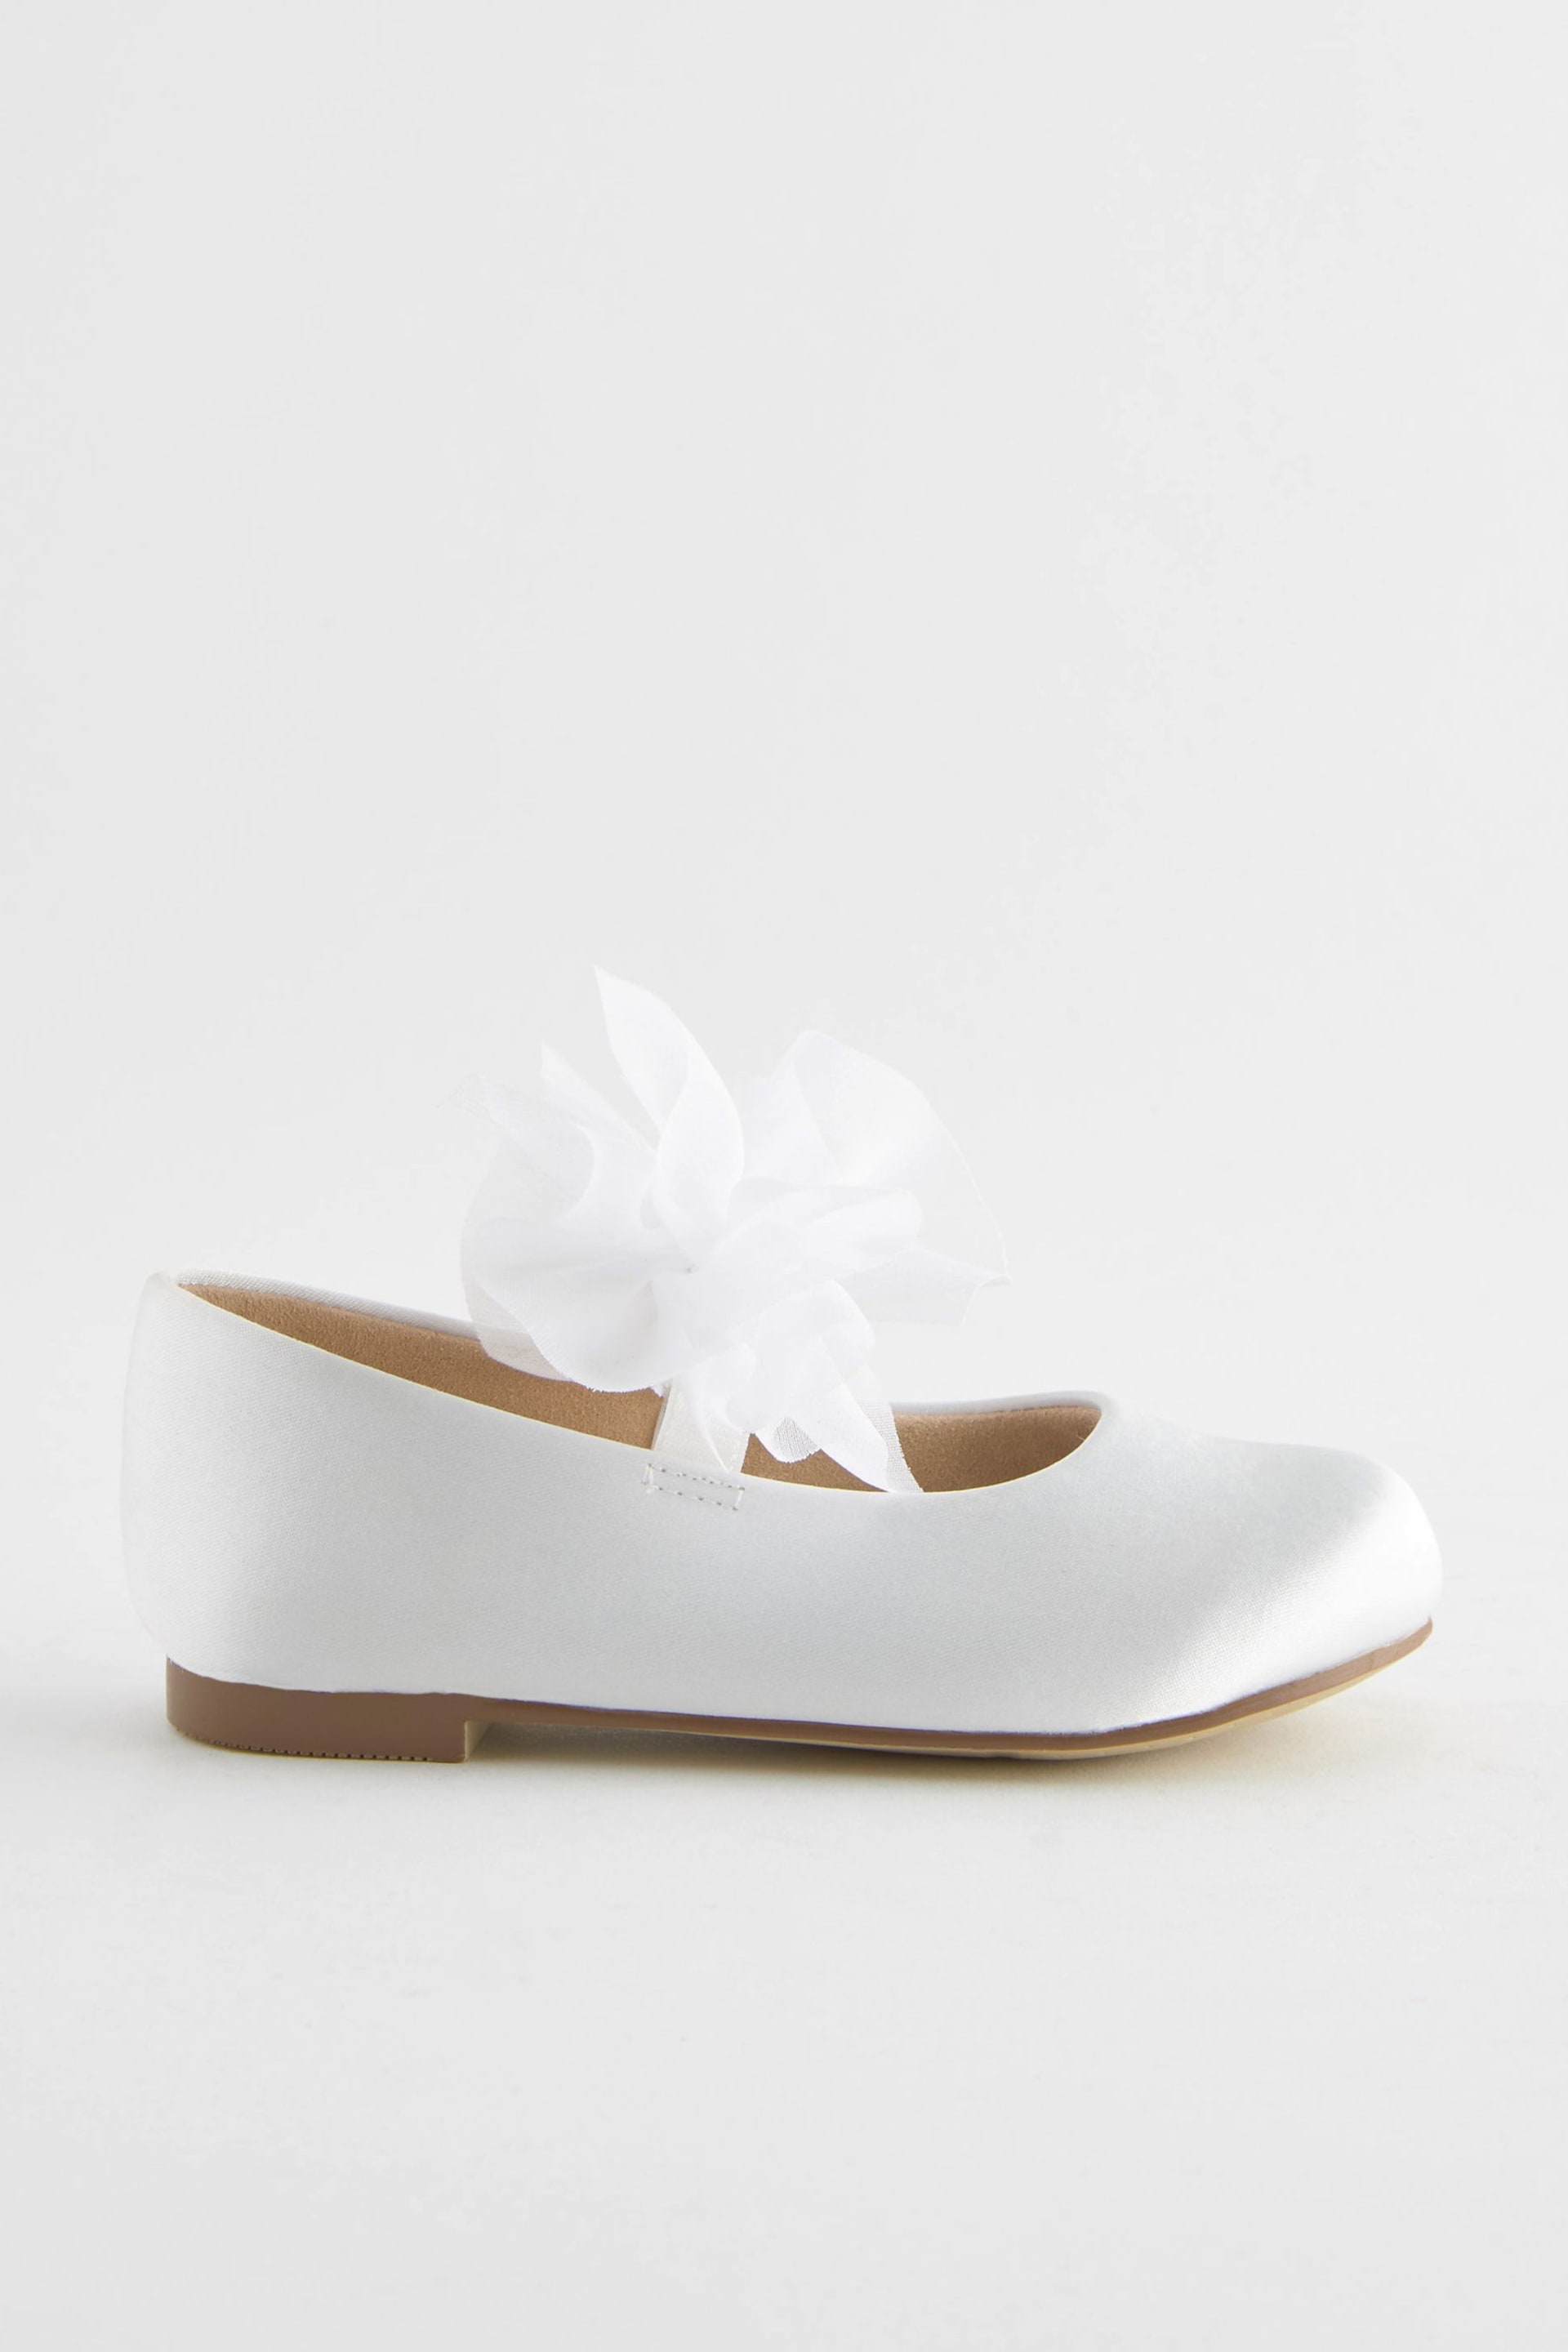 White Wide Fit (G) Mary Jane Bow Occasion Shoes - Image 2 of 5